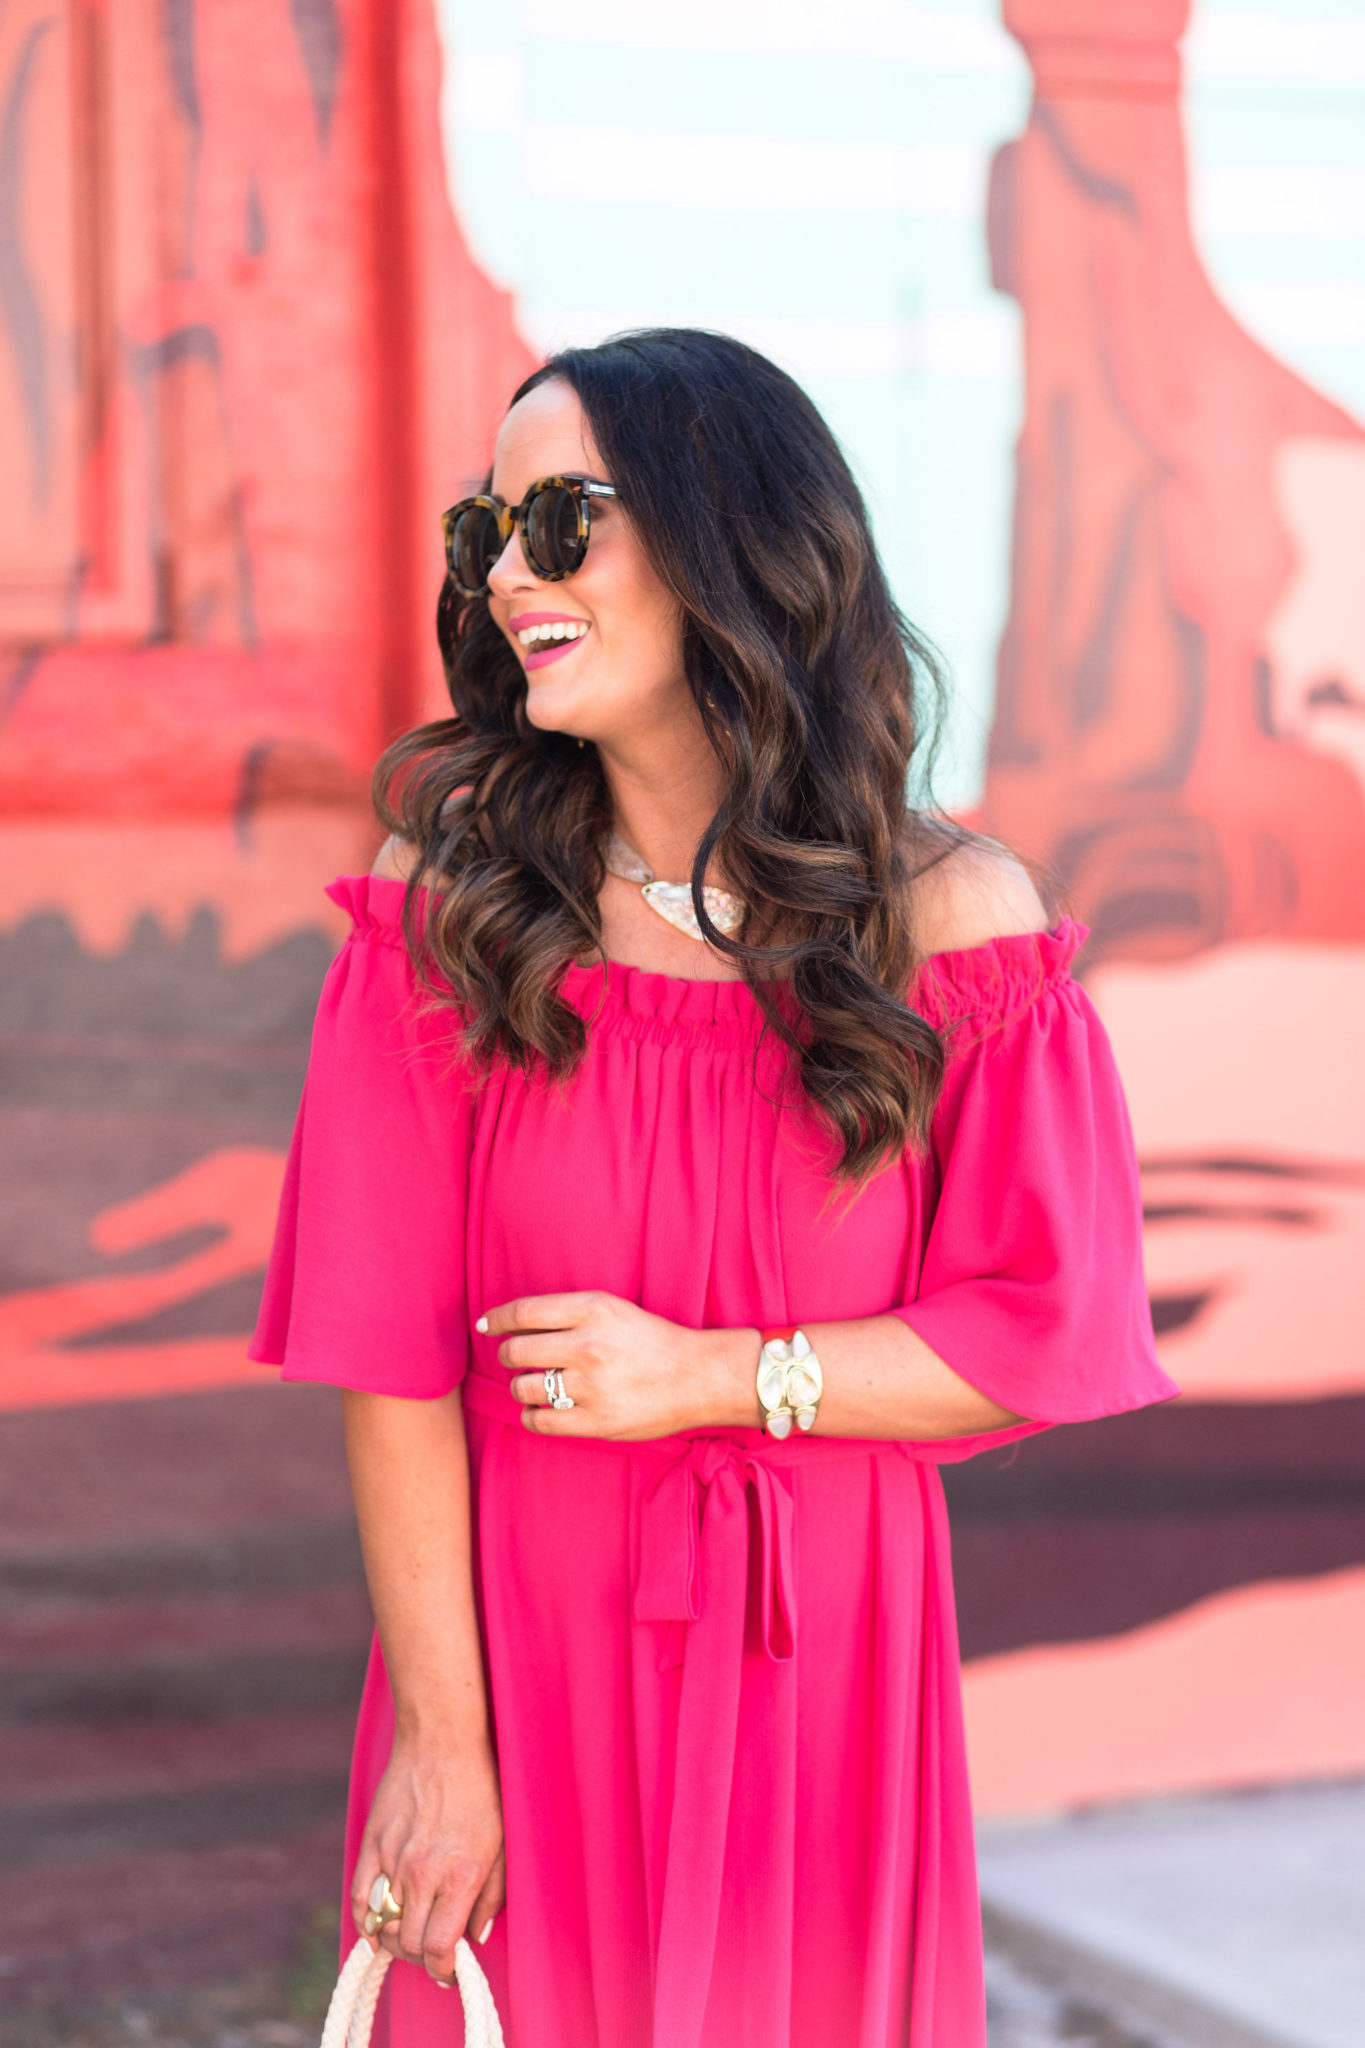 Kendra Scott Summer Collection + 20 Off!! The Double Take Girls